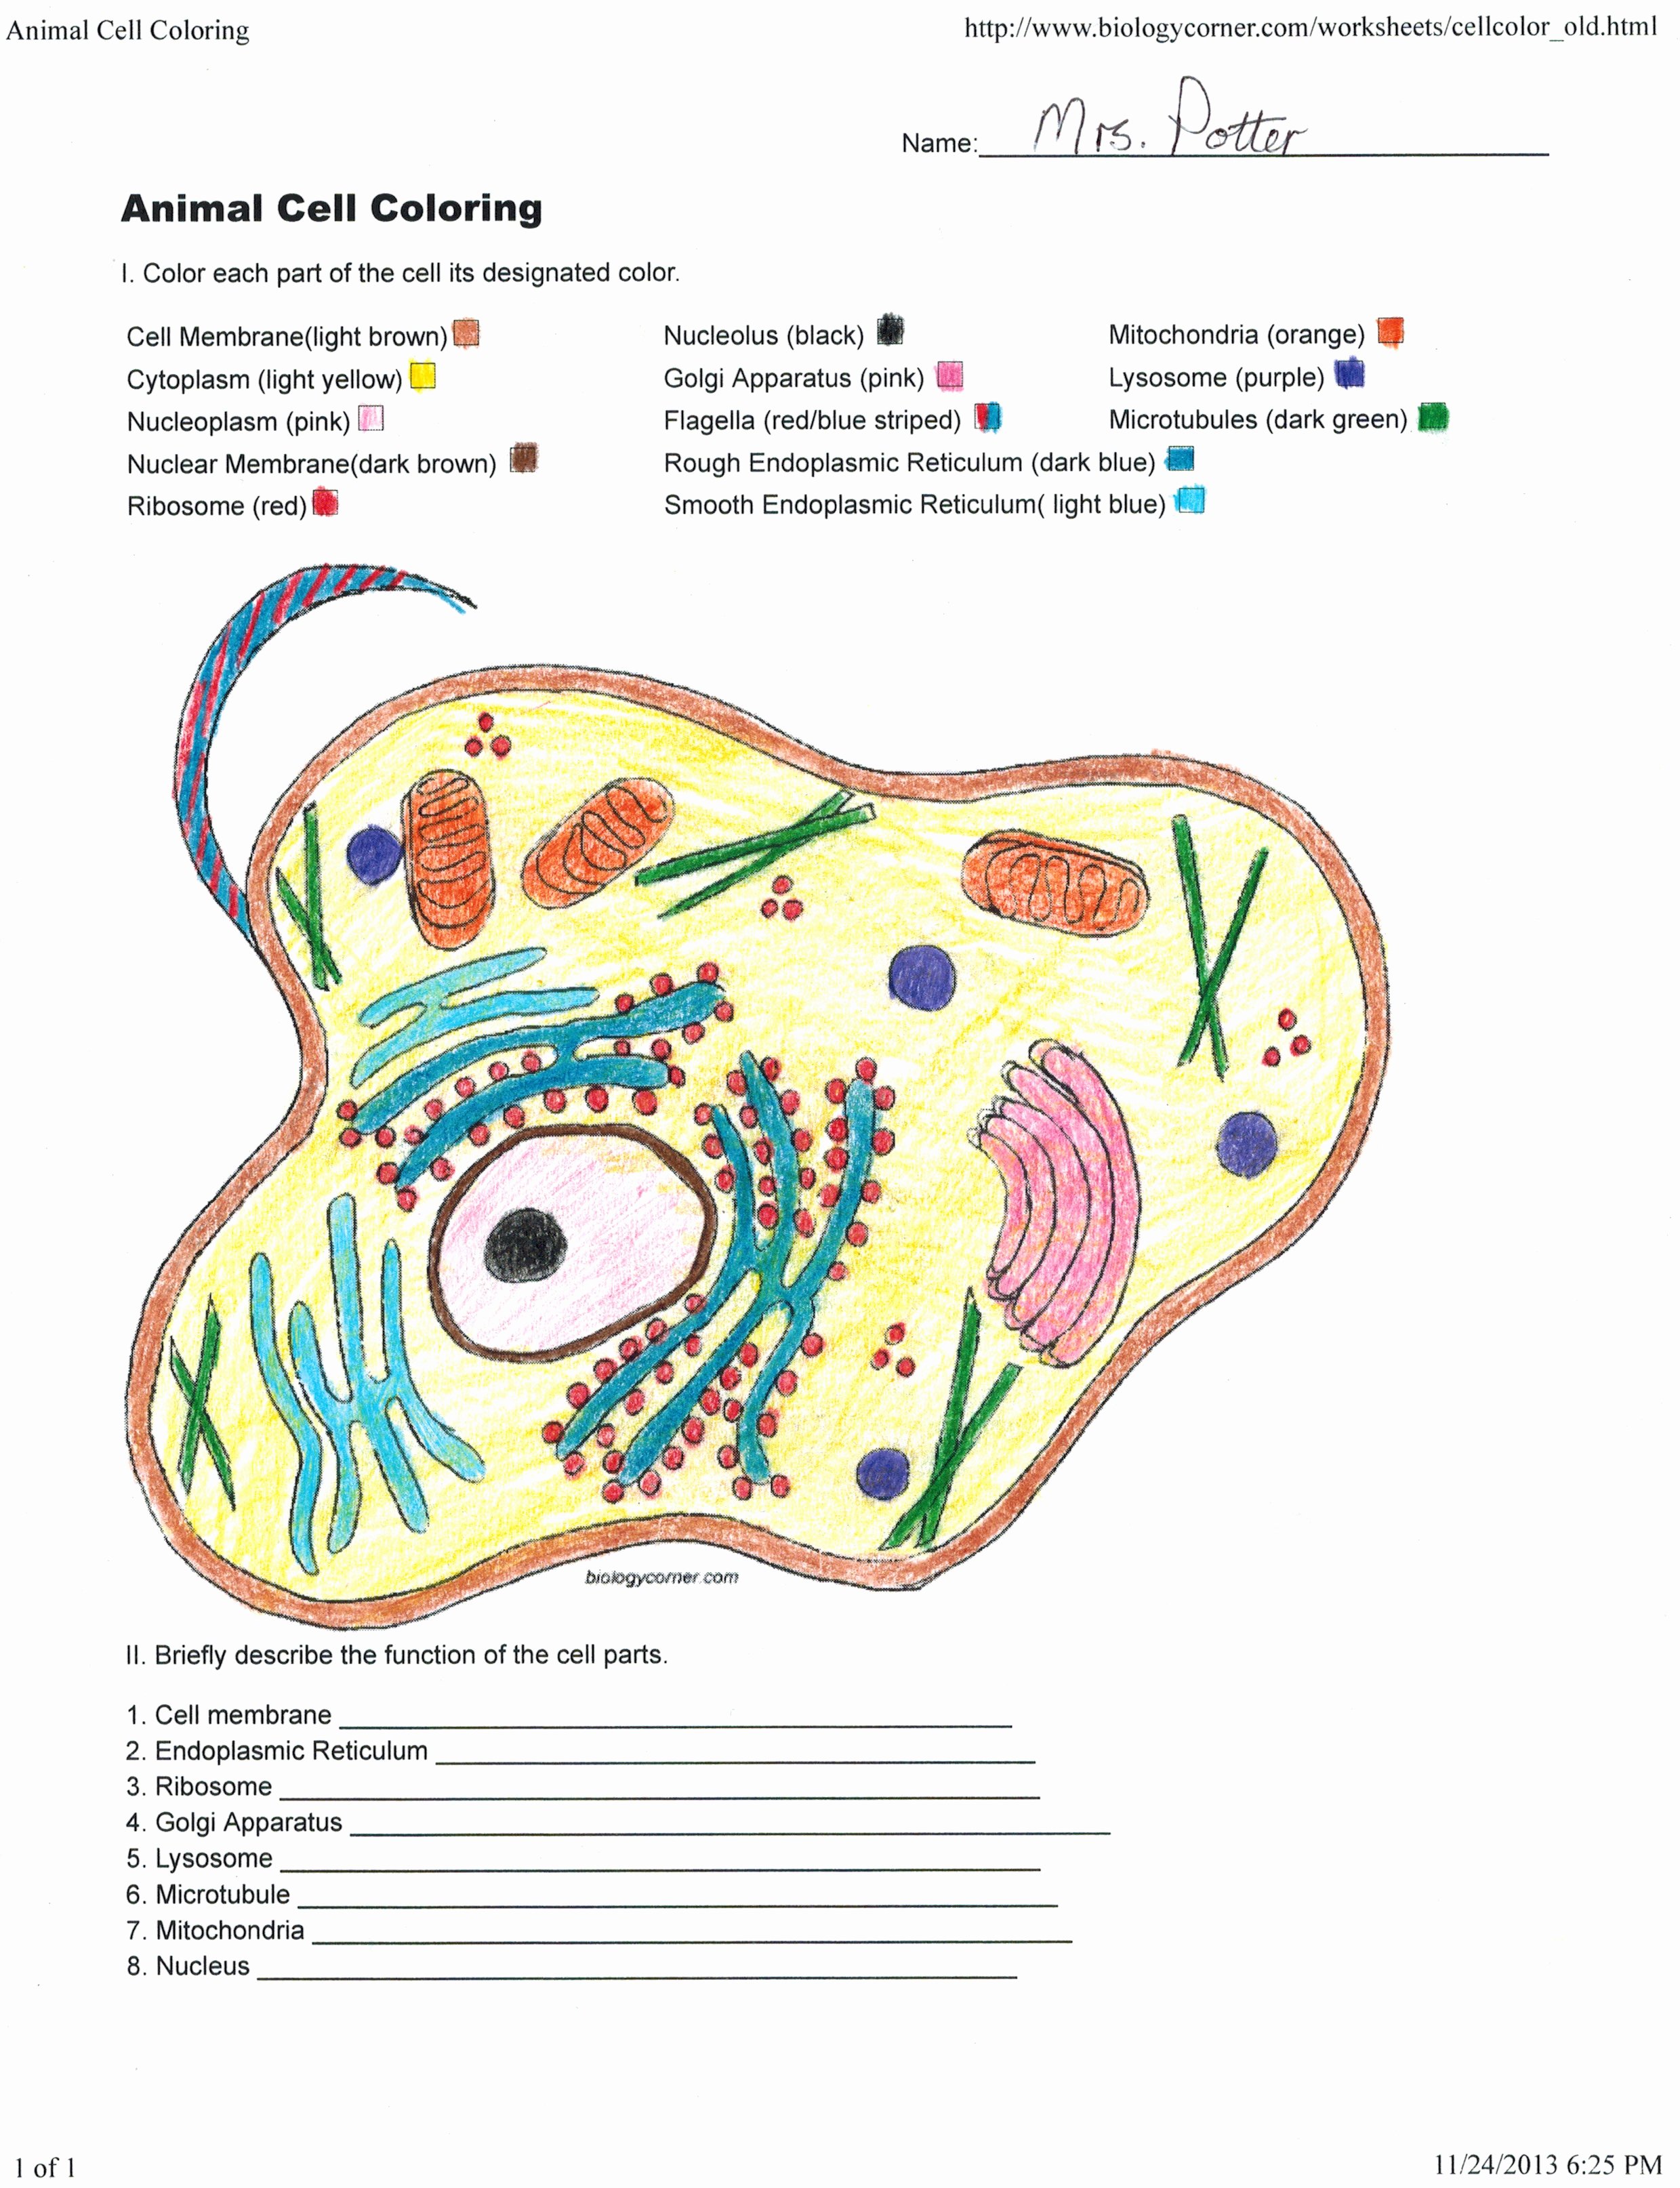 Plant Cell Coloring Worksheet Luxury Apologia Biology